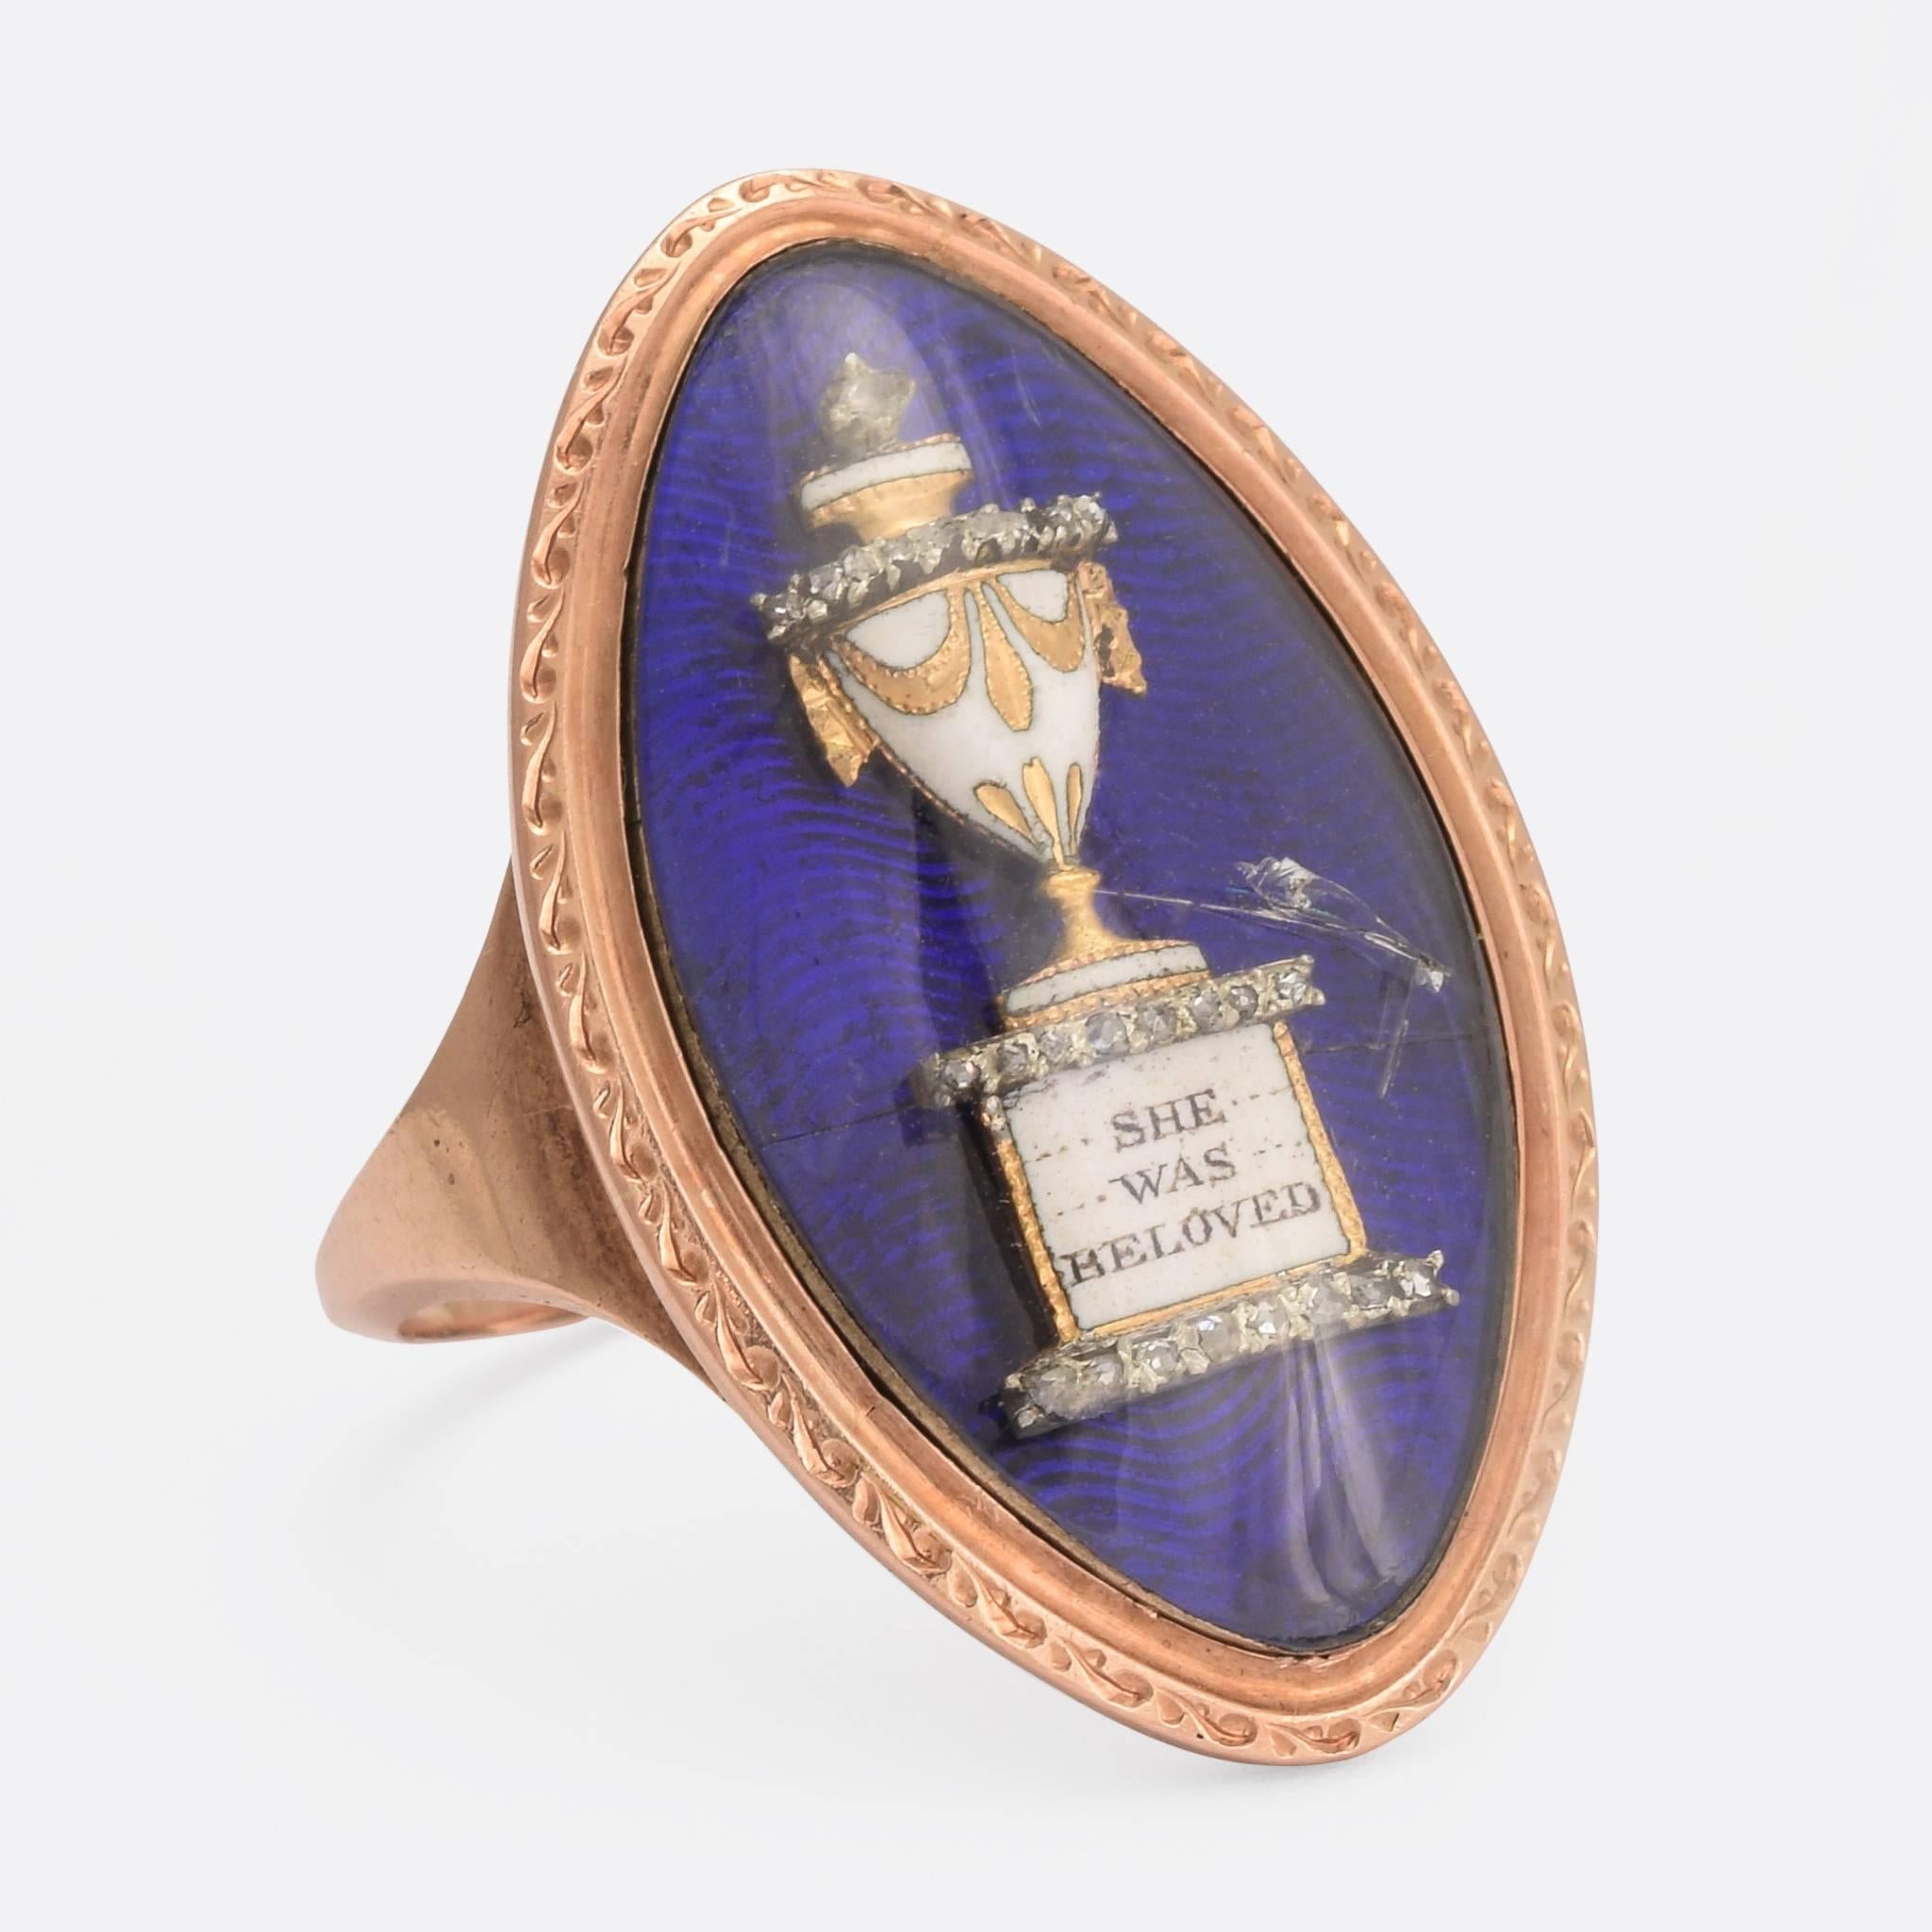 A stunning Georgian navette memorial ring. The head, behind glass, features a white enamelled urn sitting atop a plinth with the words 